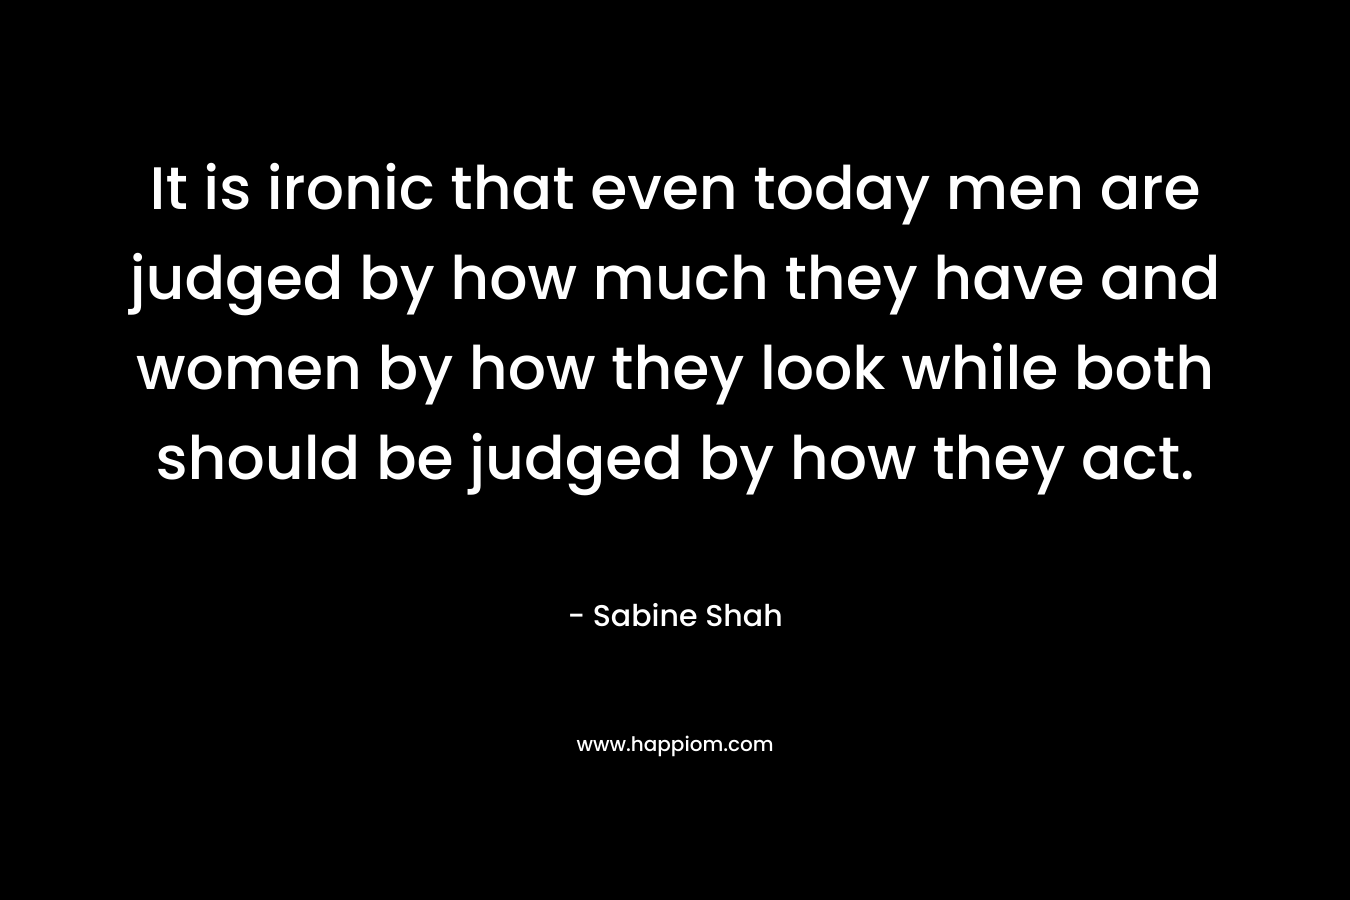 It is ironic that even today men are judged by how much they have and women by how they look while both should be judged by how they act.